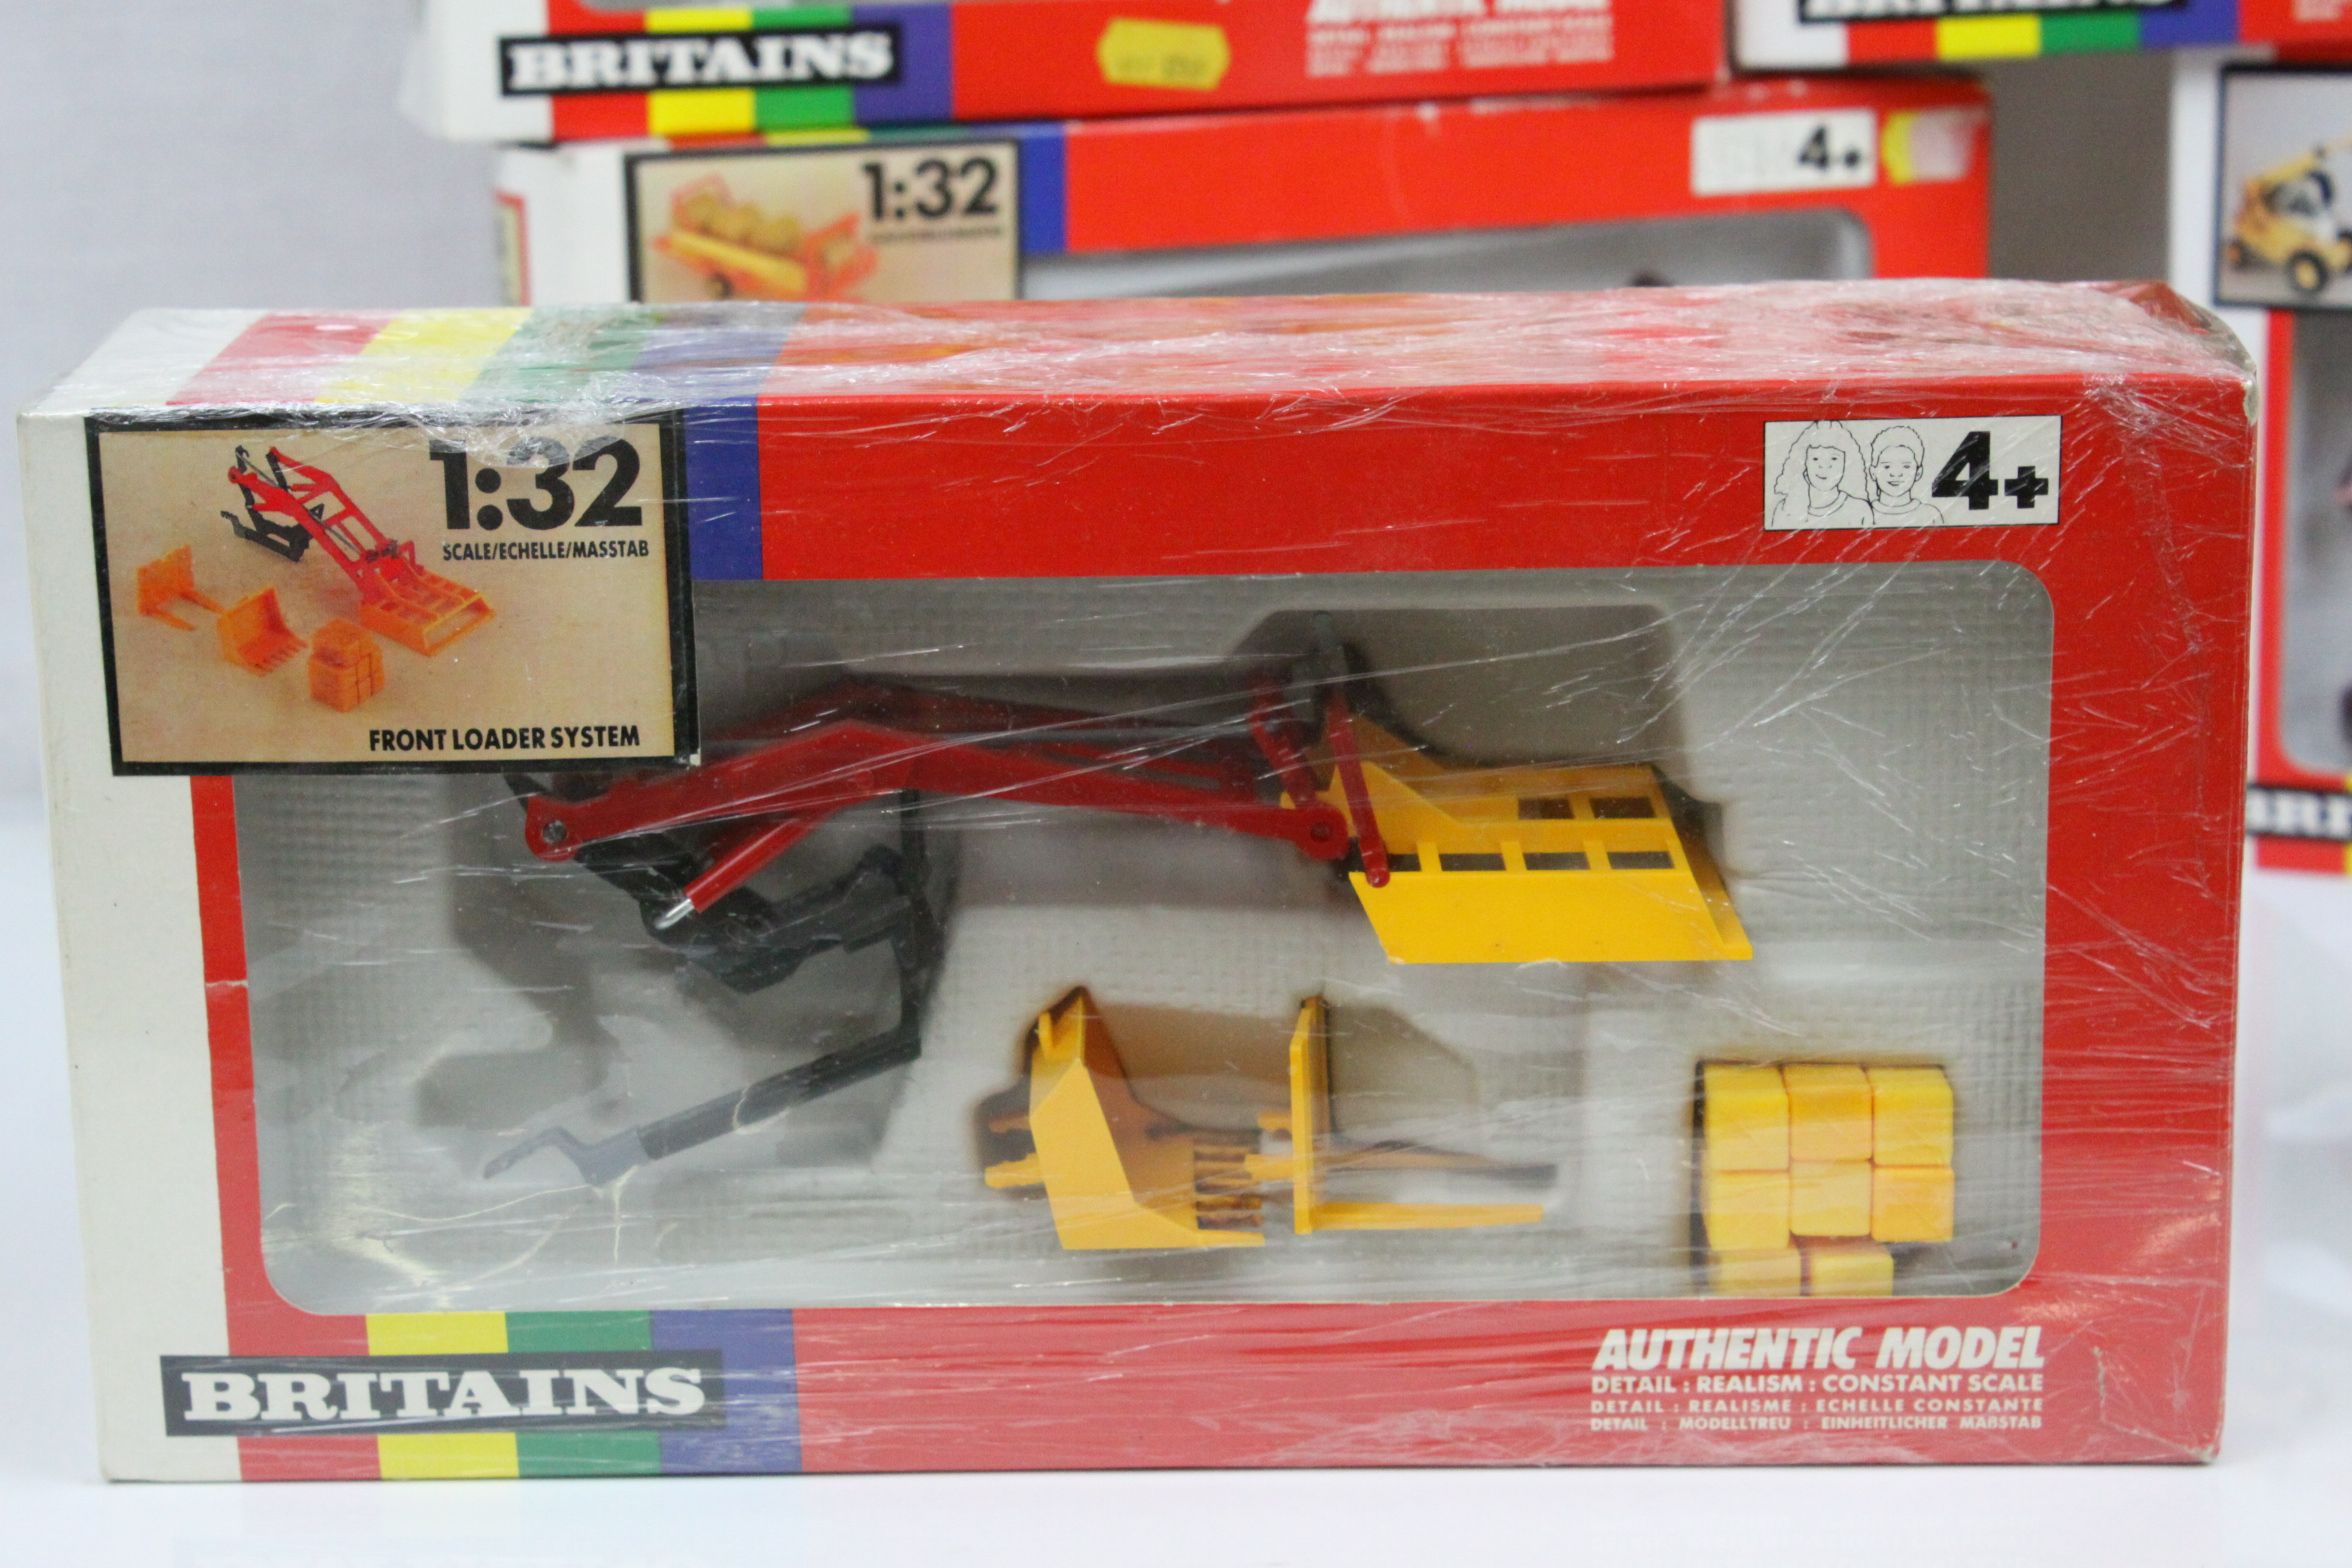 16 Boxed 1:32 Britains farming models to include 9566, 9559, 9539, 9548, 9547, 9574, 9509, 9519, - Image 18 of 27